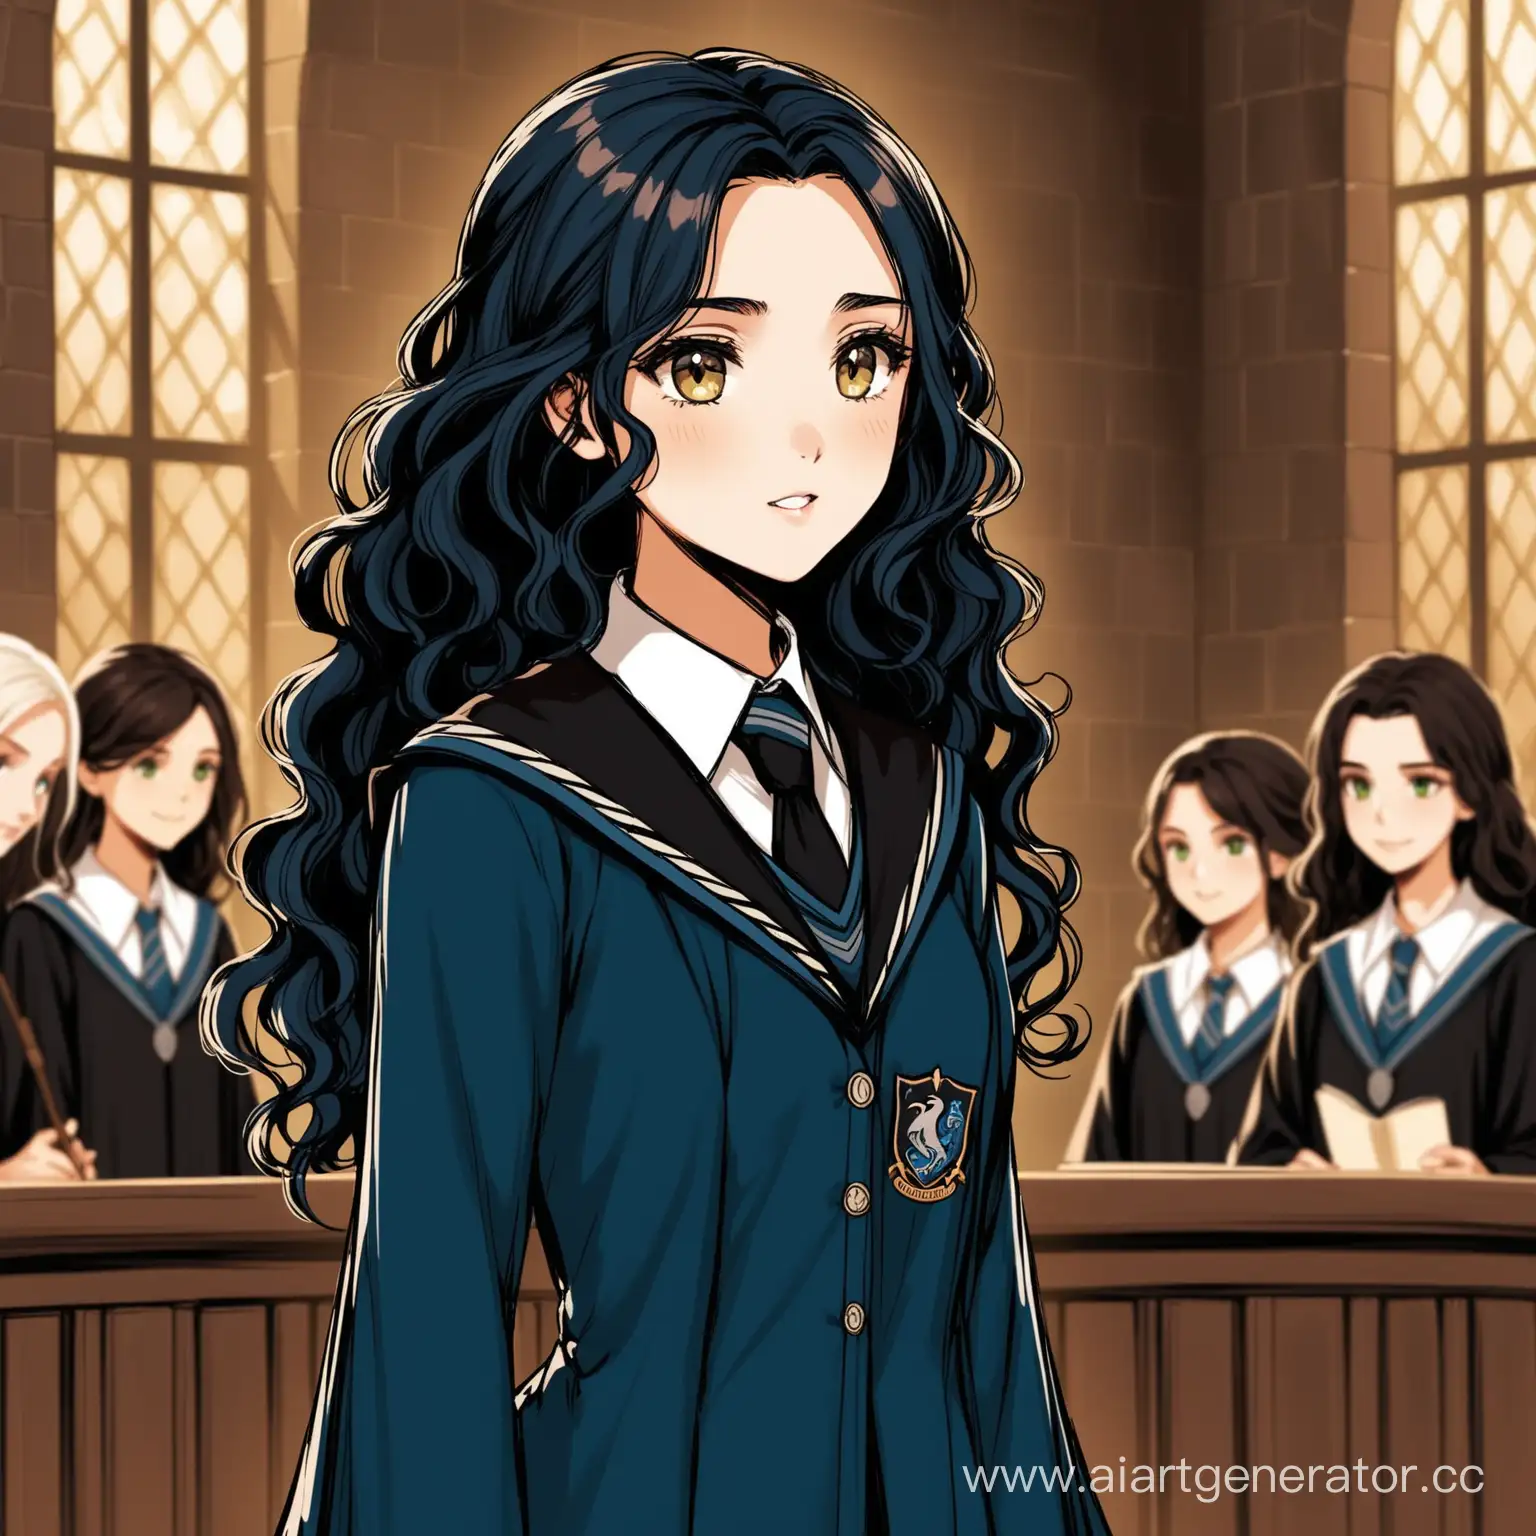 A girl from the Ravenclaw faculty, very beautiful, curly chocolate hair and hazel eyes, slender and fit, sings a song, and Draco Malfoy secretly watches her